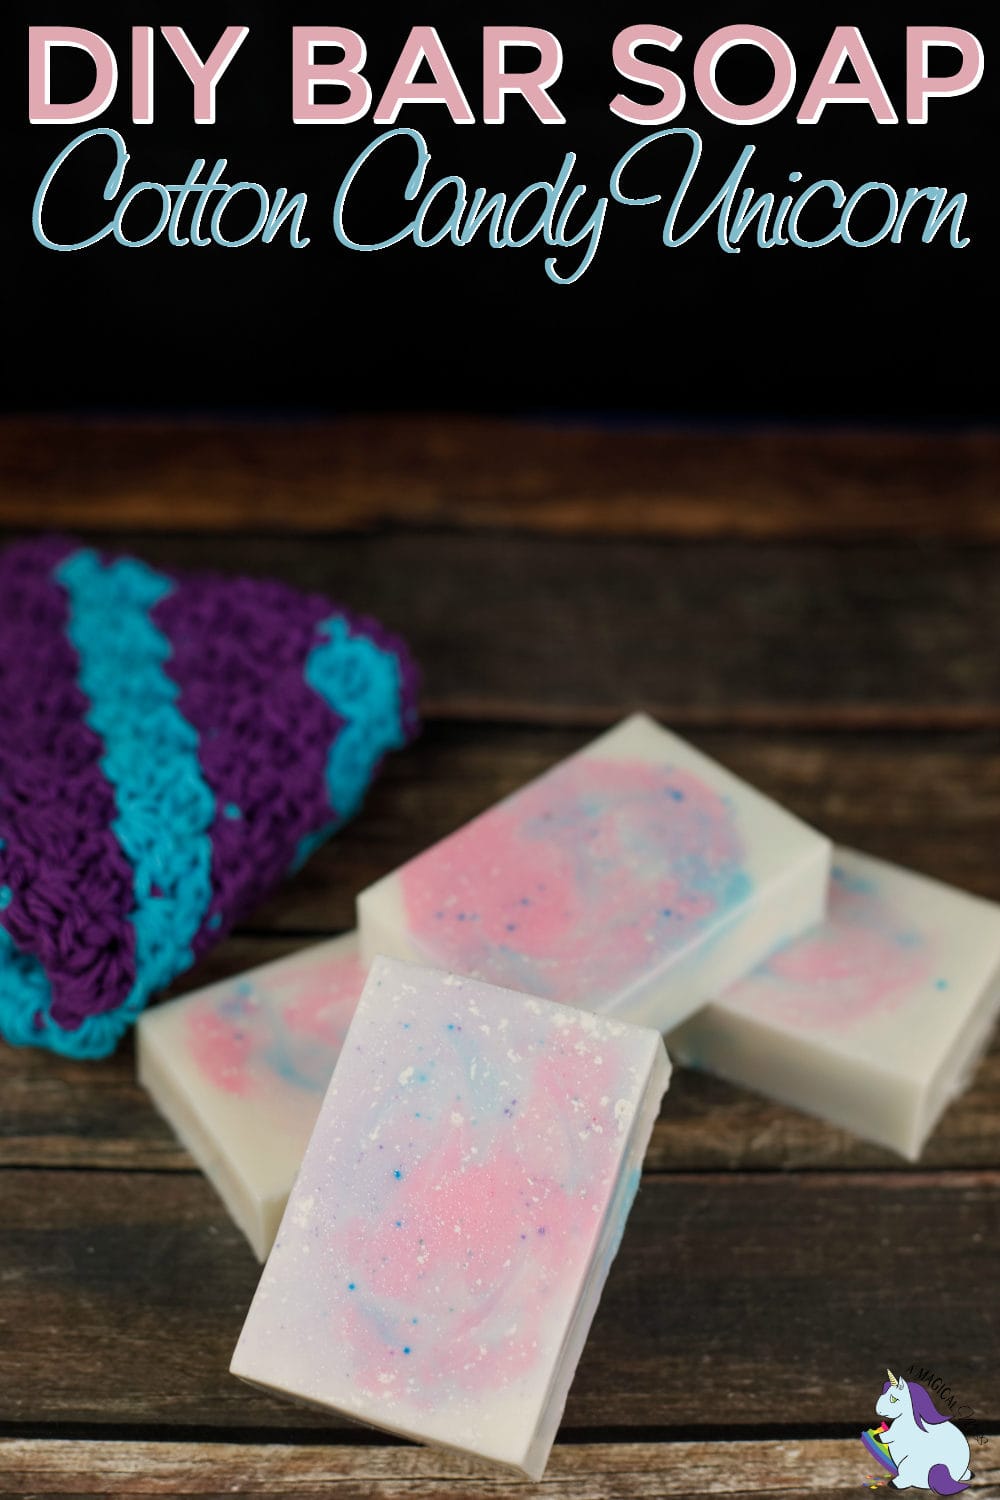 How to Make Homemade Bar Soap - Cotton Candy Unicorn